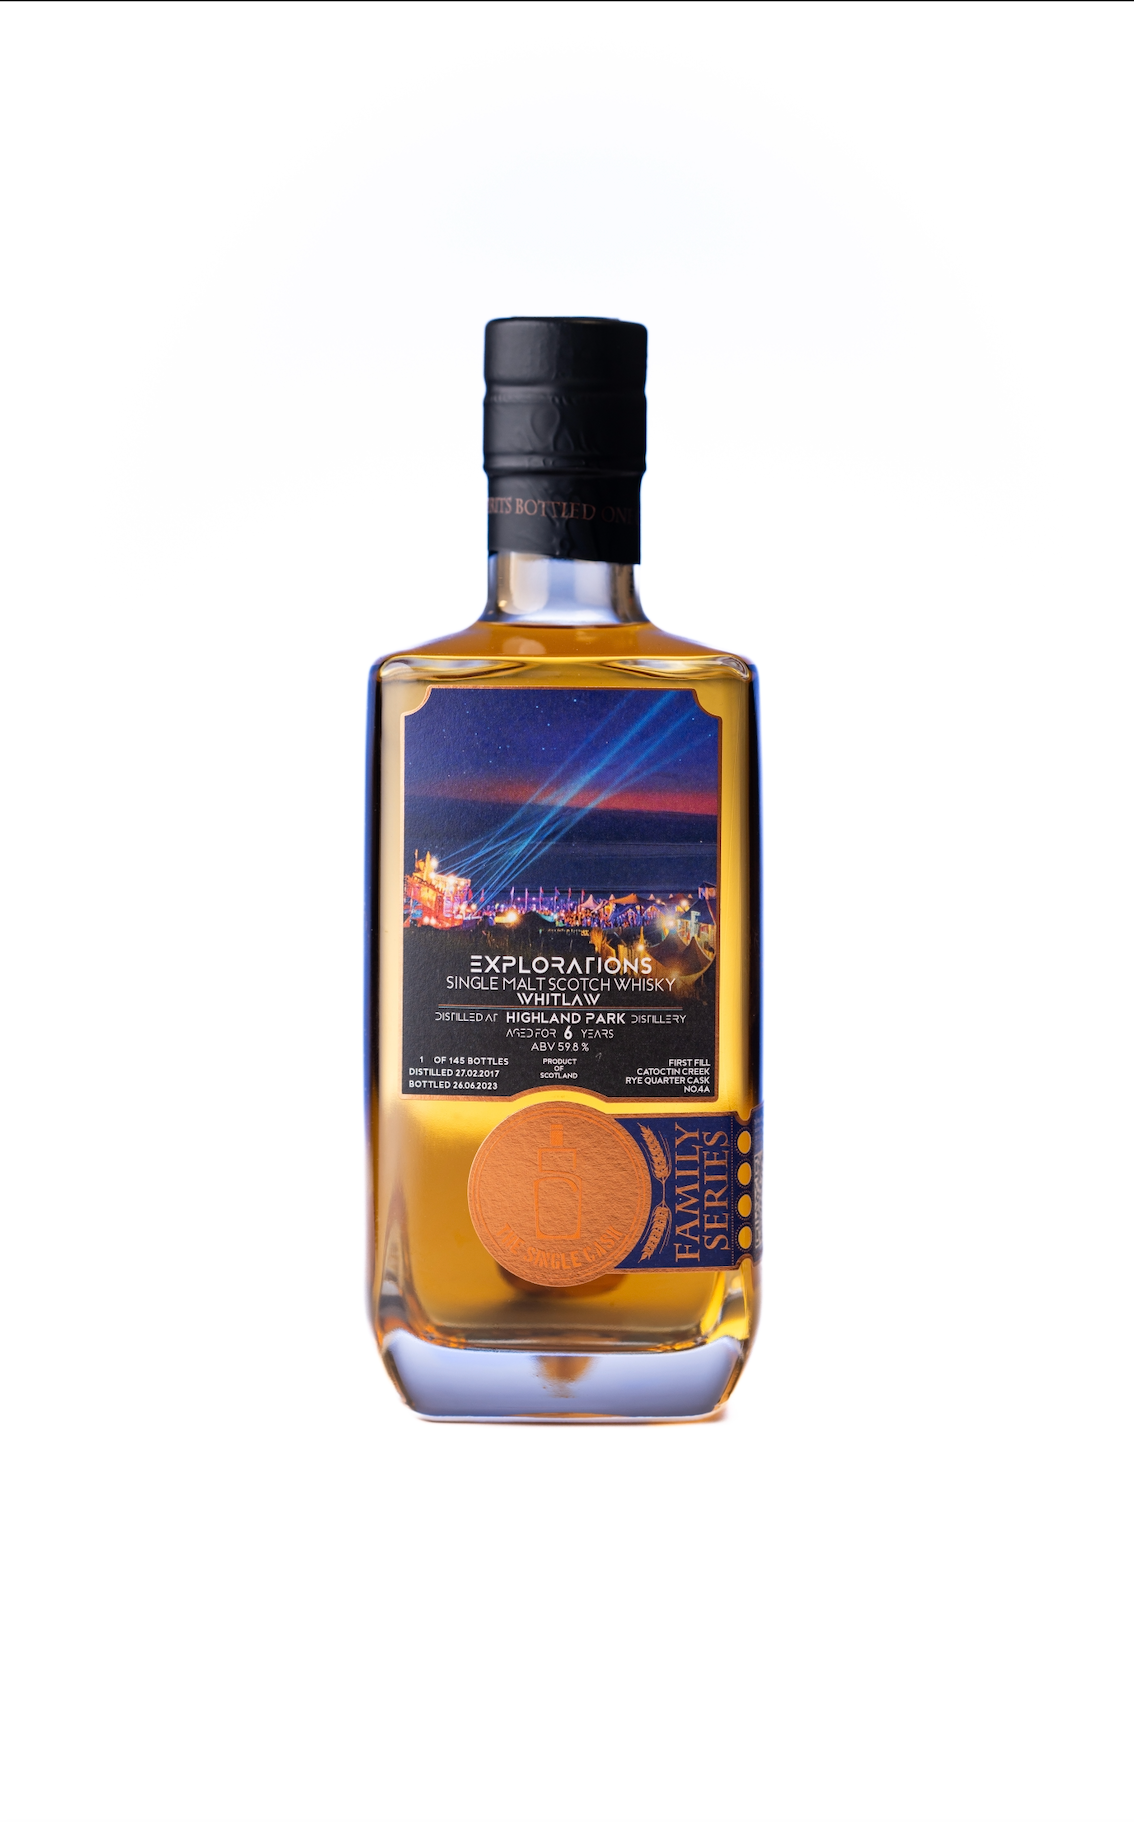 Whitlaw (Distilled at Highland Park Distillery) 6 years old whisky (cask 0000004A)